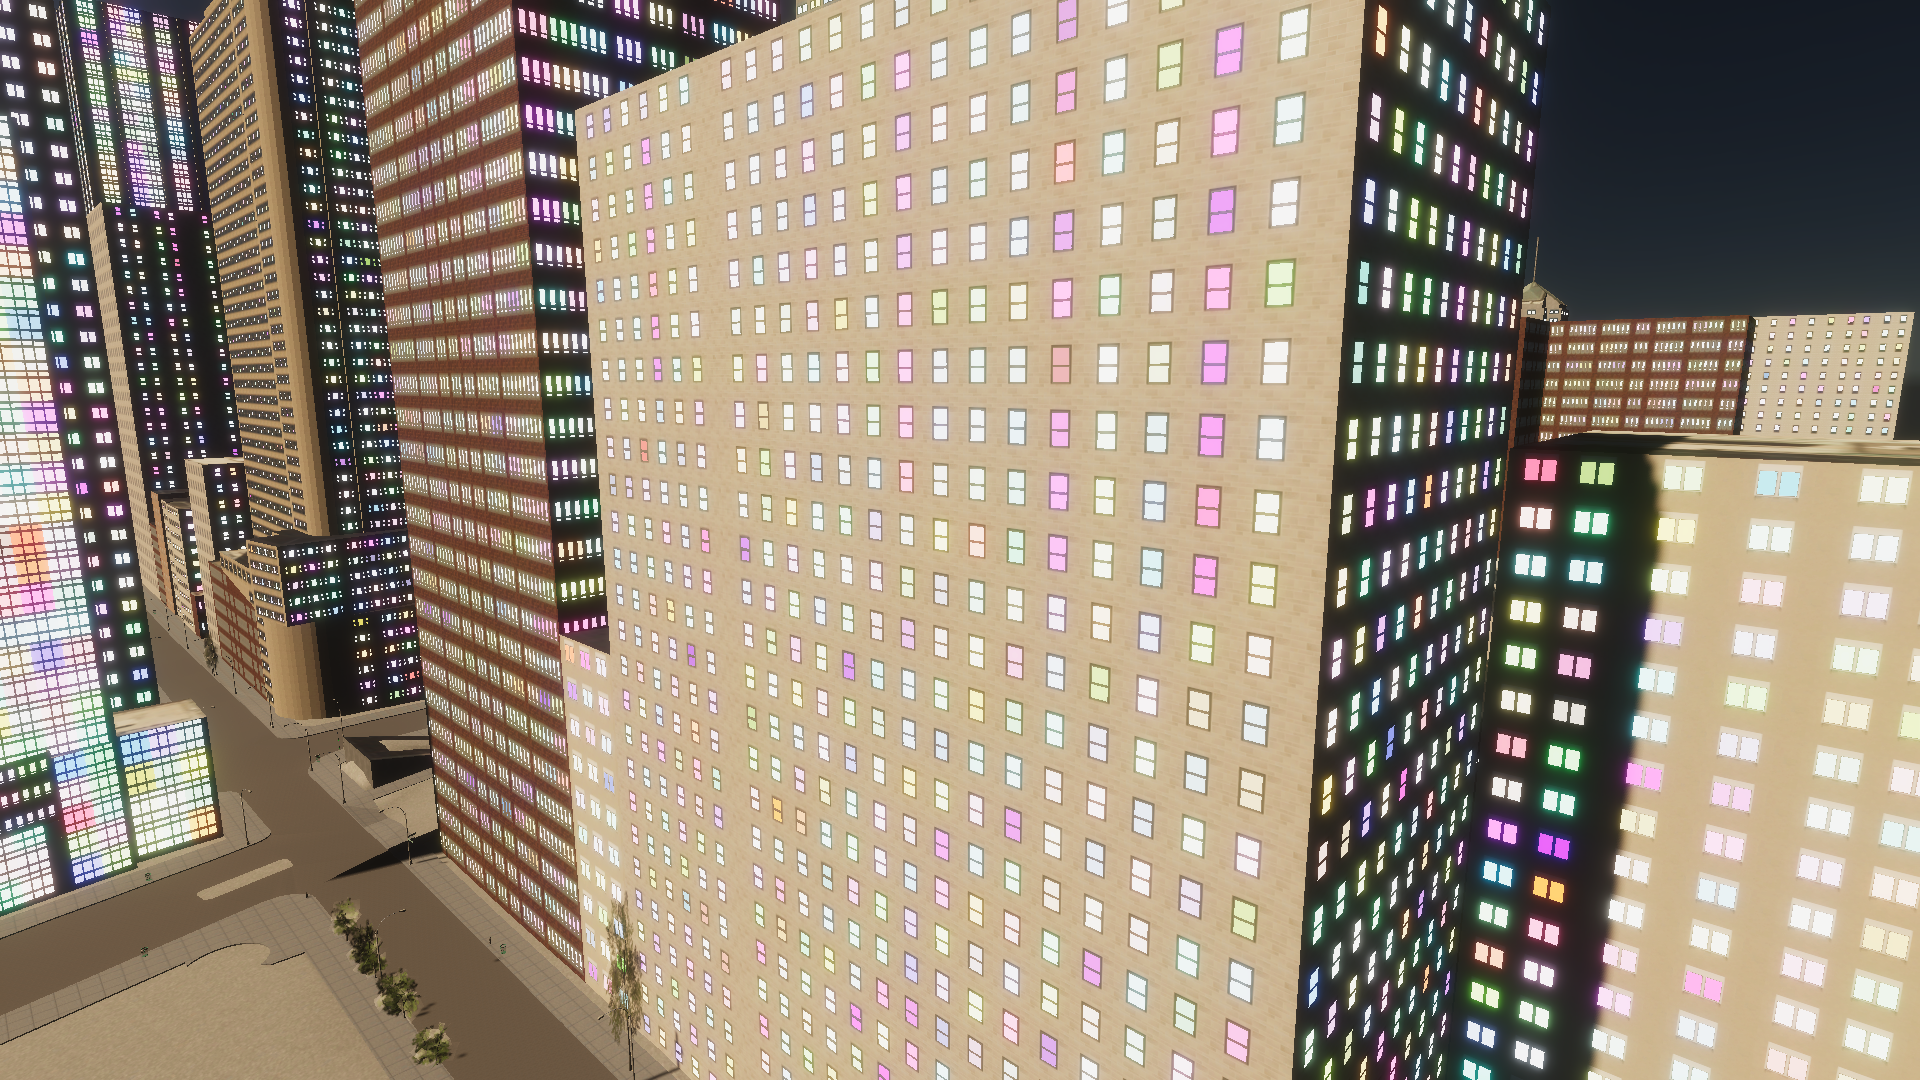 The result of this shader. Each window is lit up with a different color.